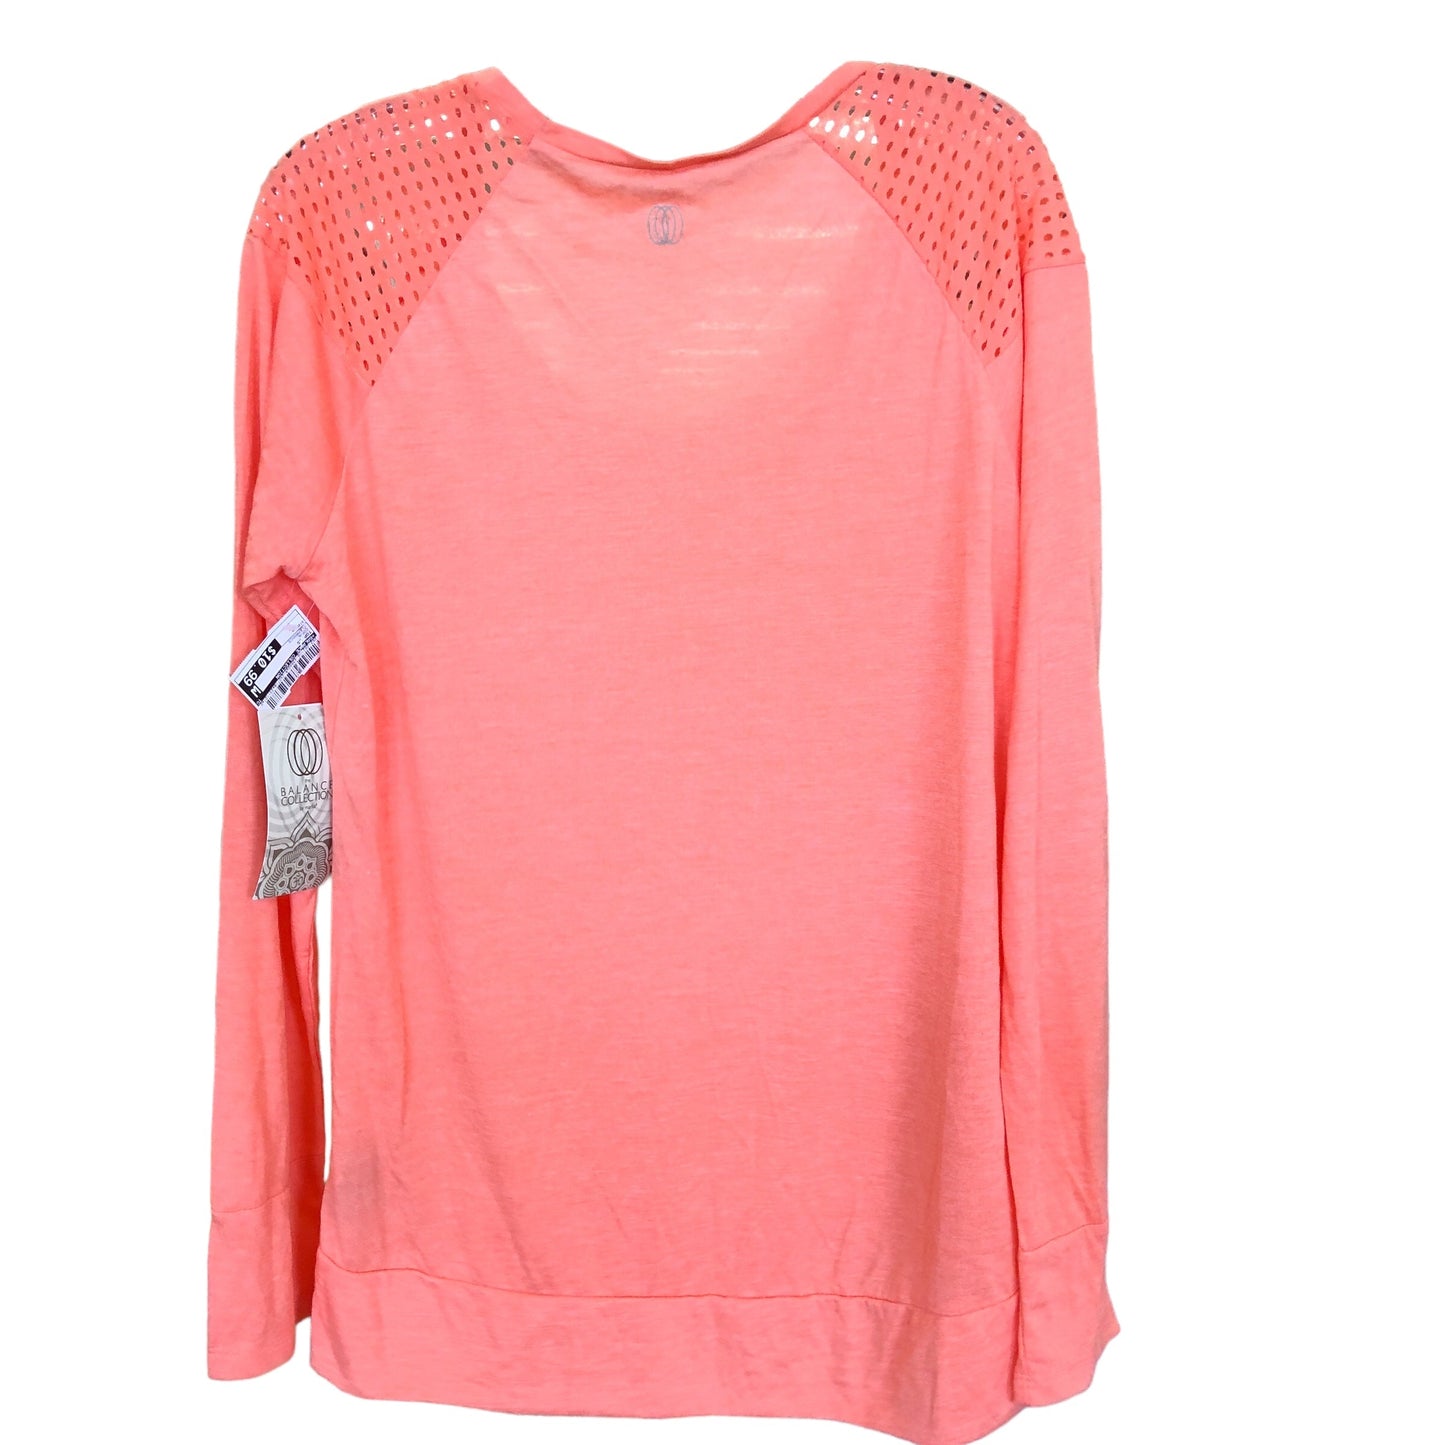 Coral Top Long Sleeve Balance Collection, Size Xl